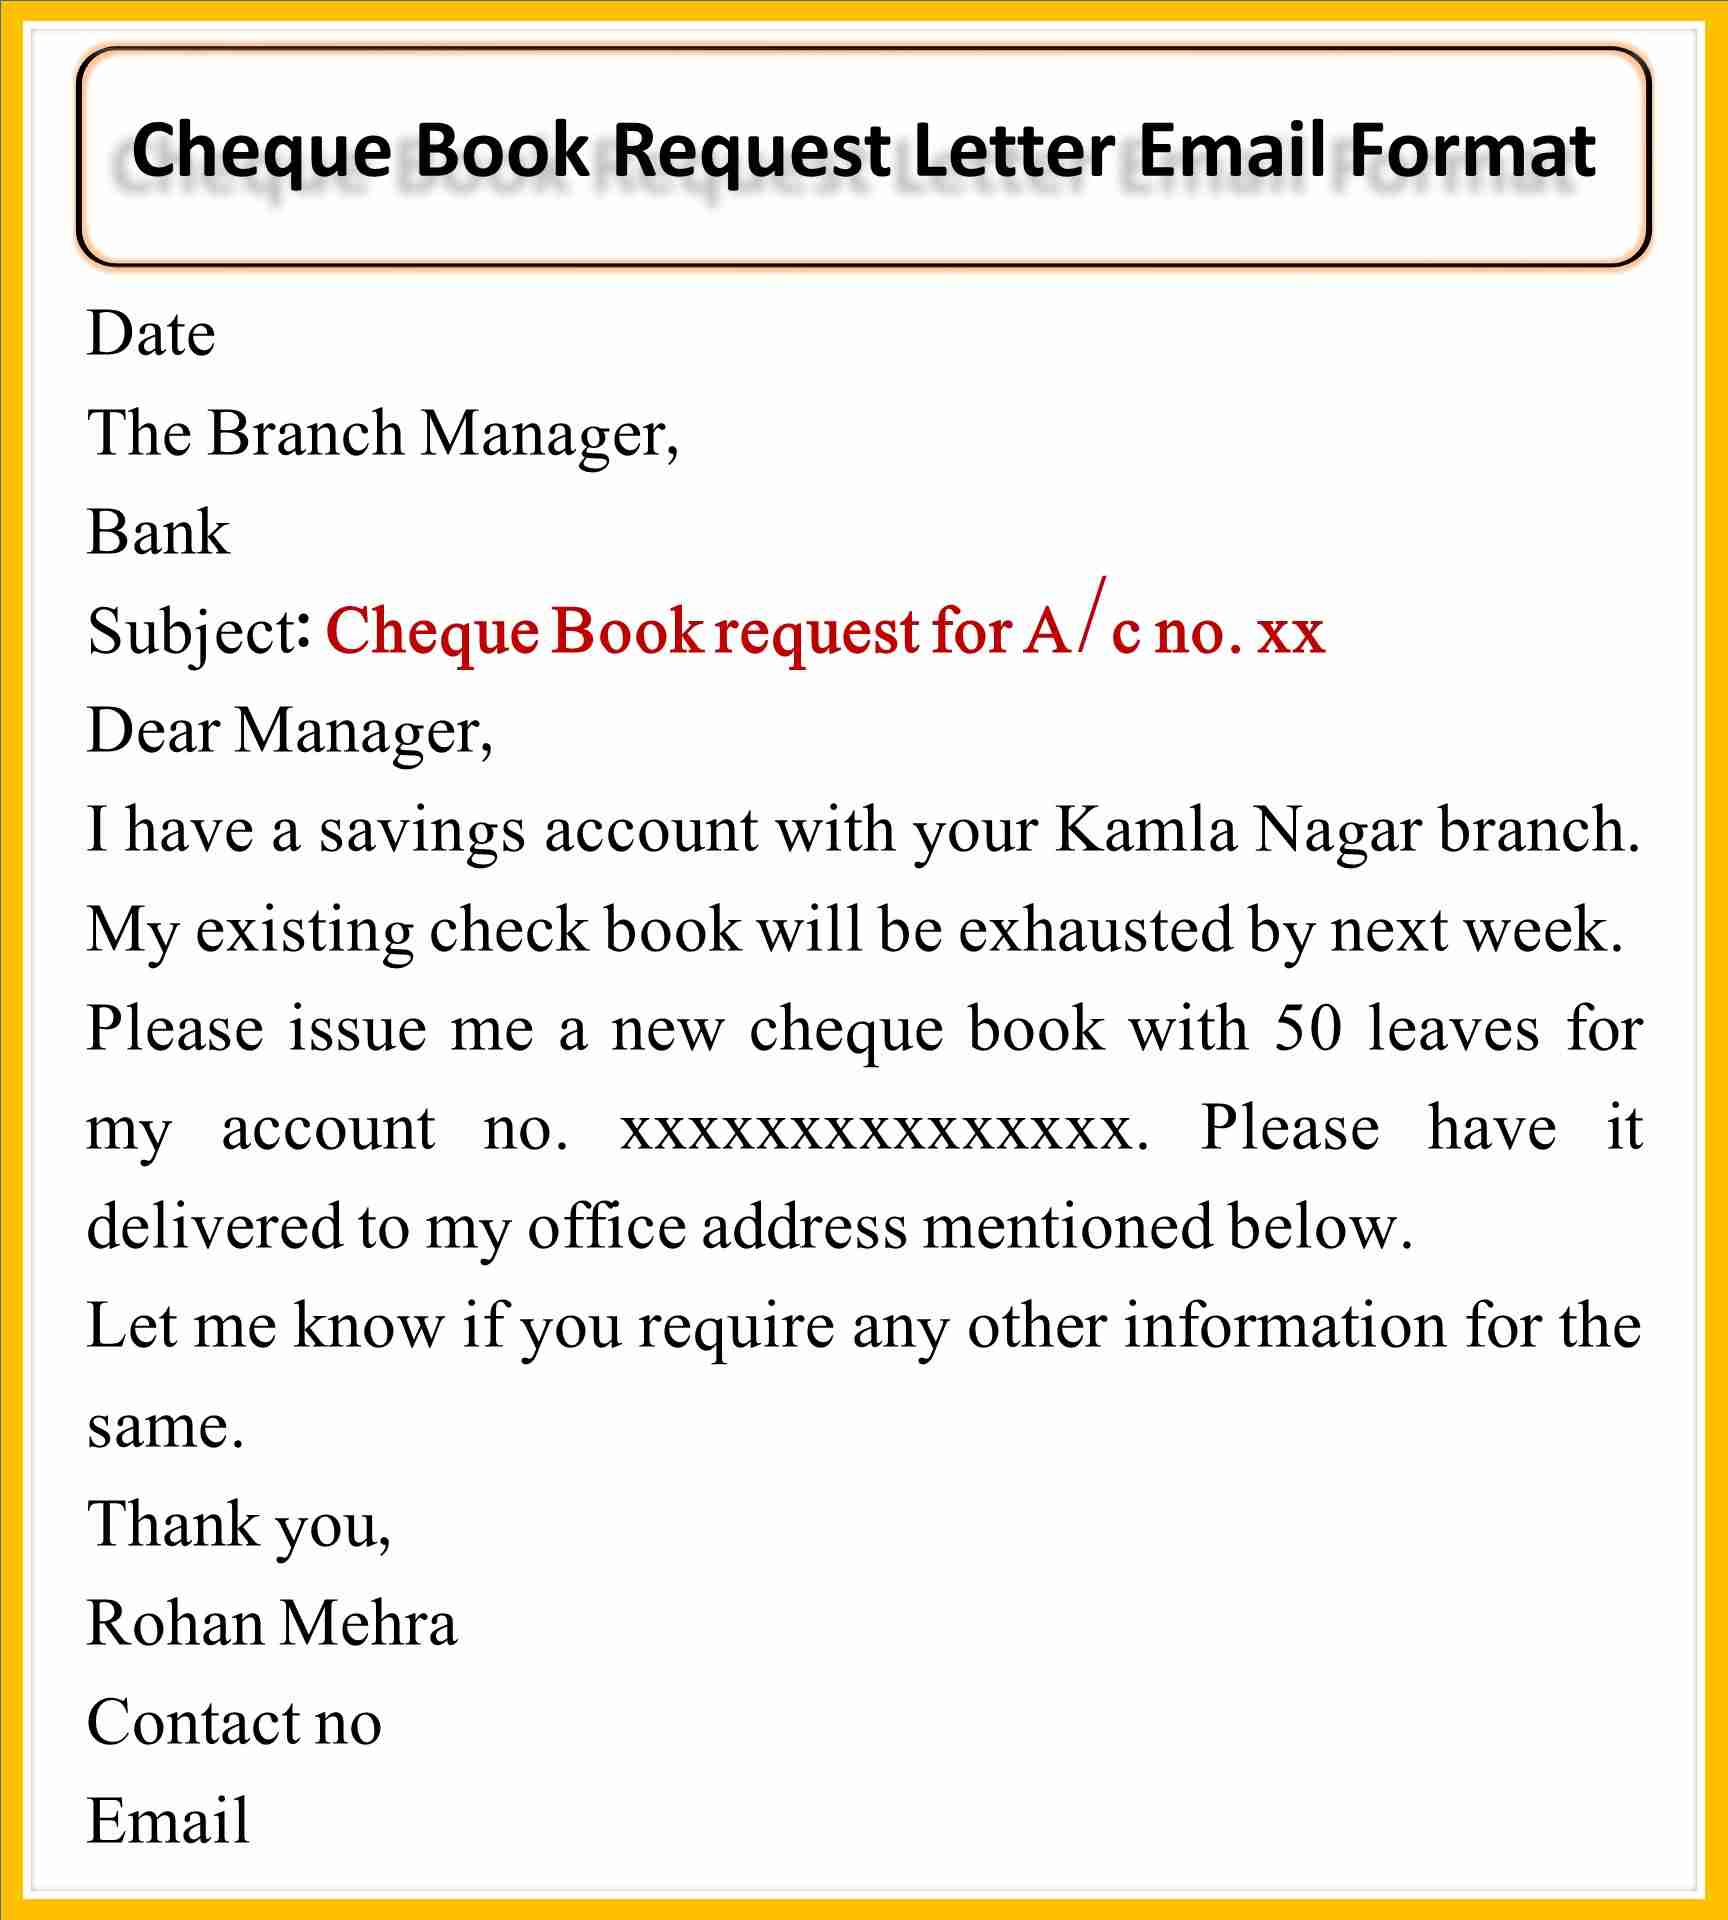 Cheque Book Request Letter Email Format in English